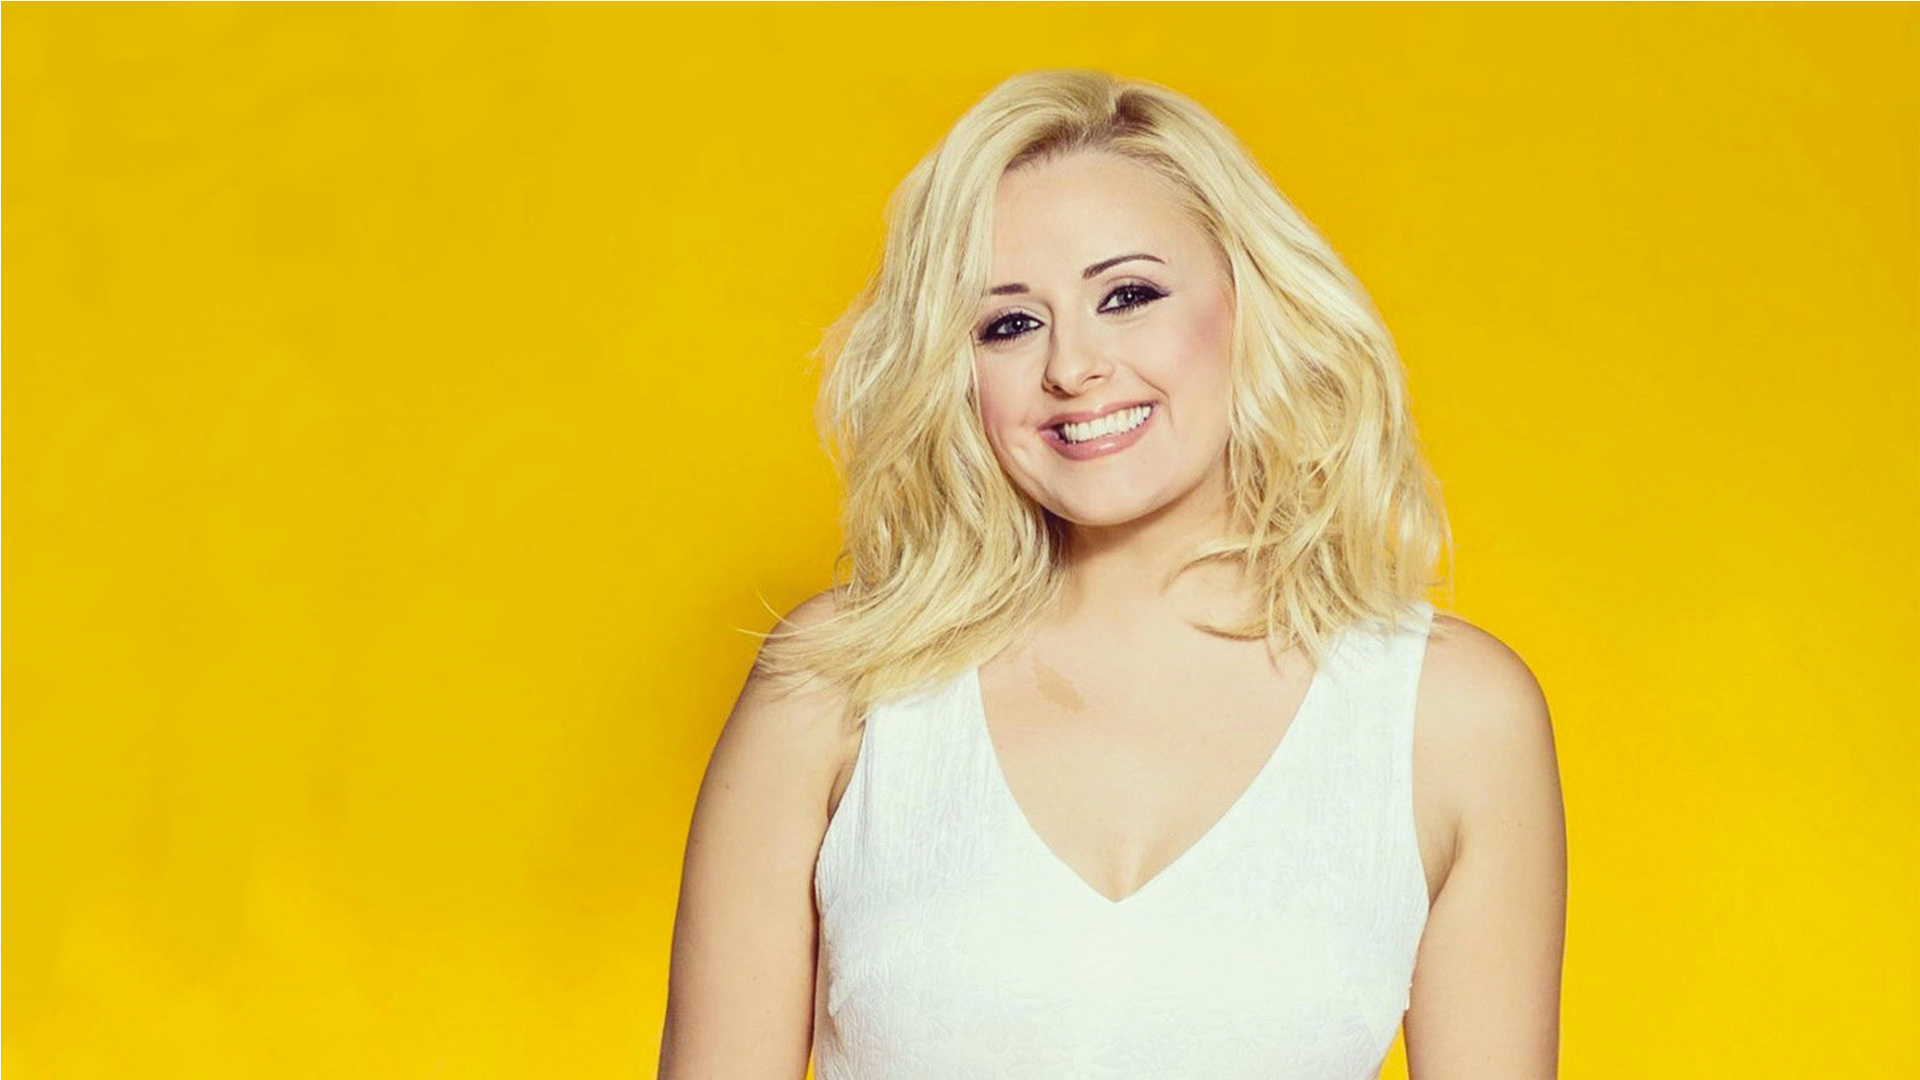 Katie Thistleton smiling and wearing a cream dress against a yellow background